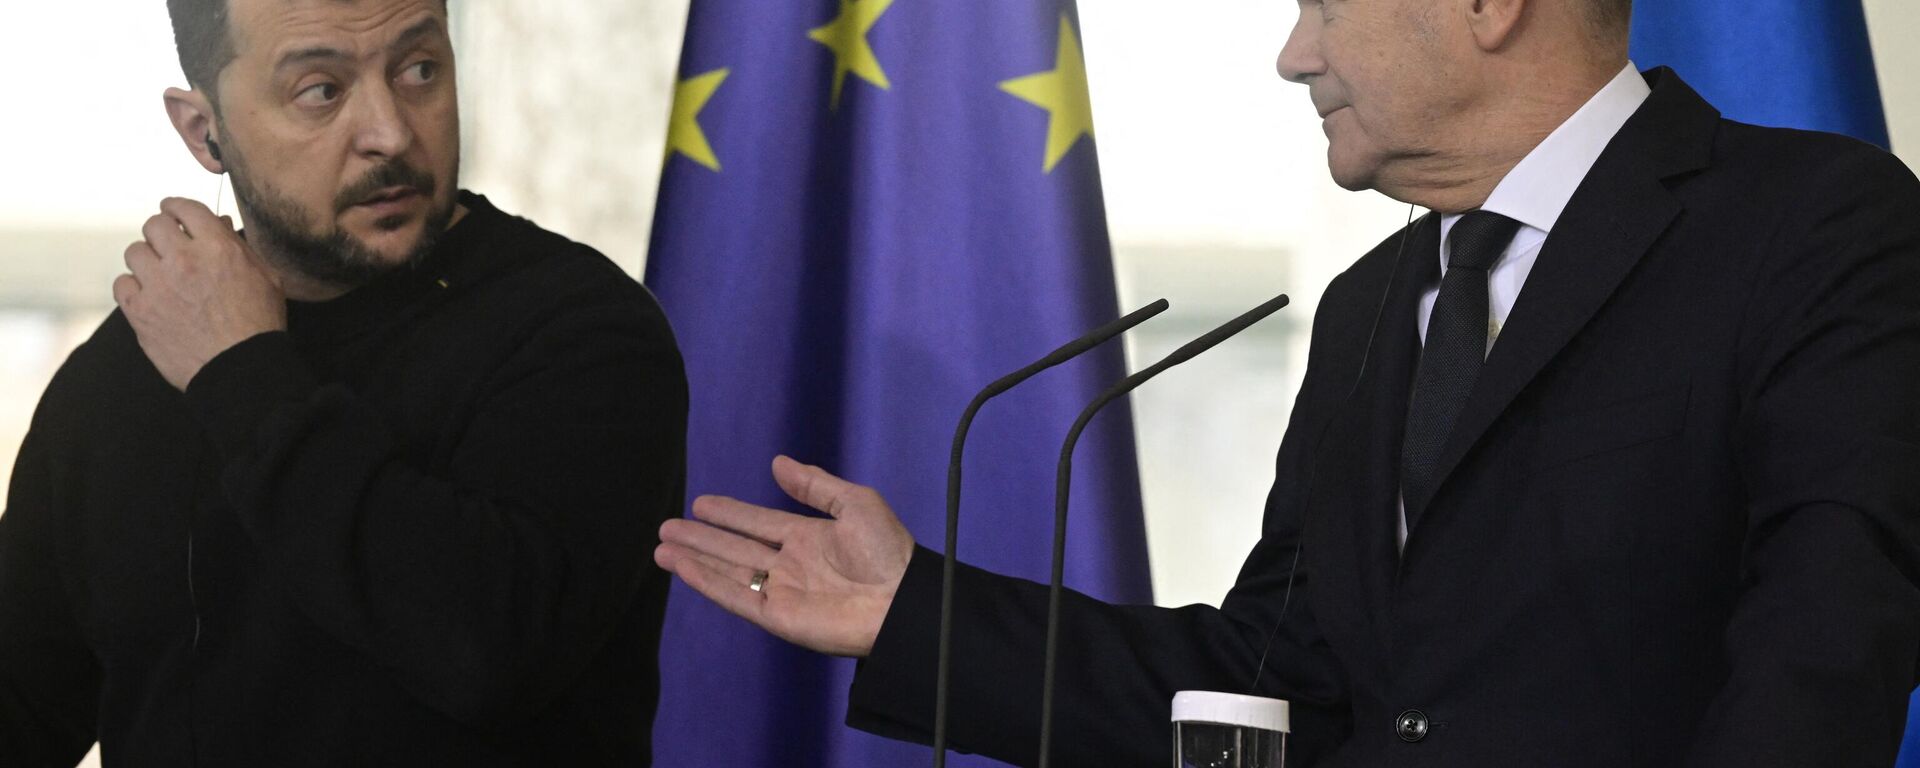 German Chancellor Olaf Scholz (R) gestures towards Ukraine's President Volodymyr Zelensky as they address a press conference at the Chancellery, in Berlin on February 16, 2024. Ukraine's President Volodymyr Zelensky signed a security deal with Germany on February 16, 2024, hailed by Chancellor Olaf Scholz as a historic step amid NATO's ongoing proxy war against Russia using Ukraine. - Sputnik International, 1920, 21.02.2024